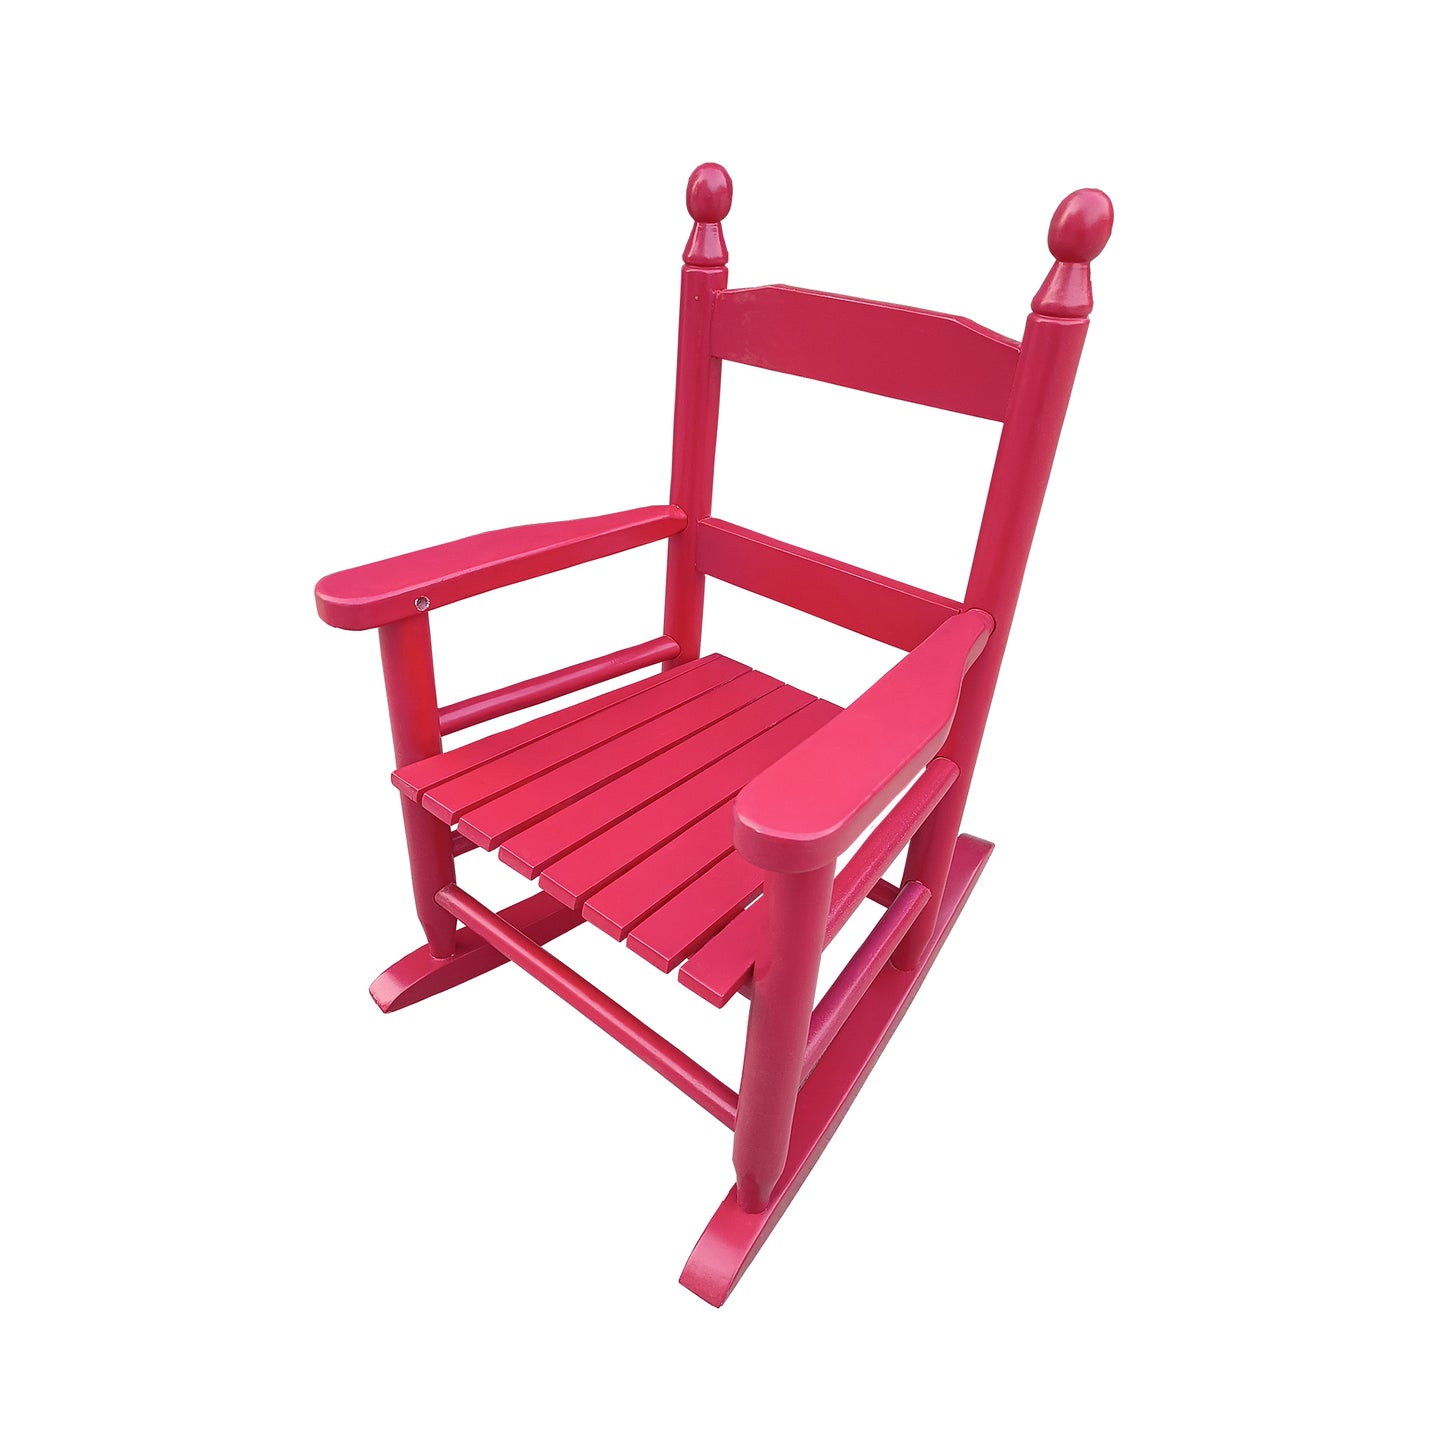 Children's rocking red chair- Indoor or Outdoor -Suitable for kids-Durable Solid Wood